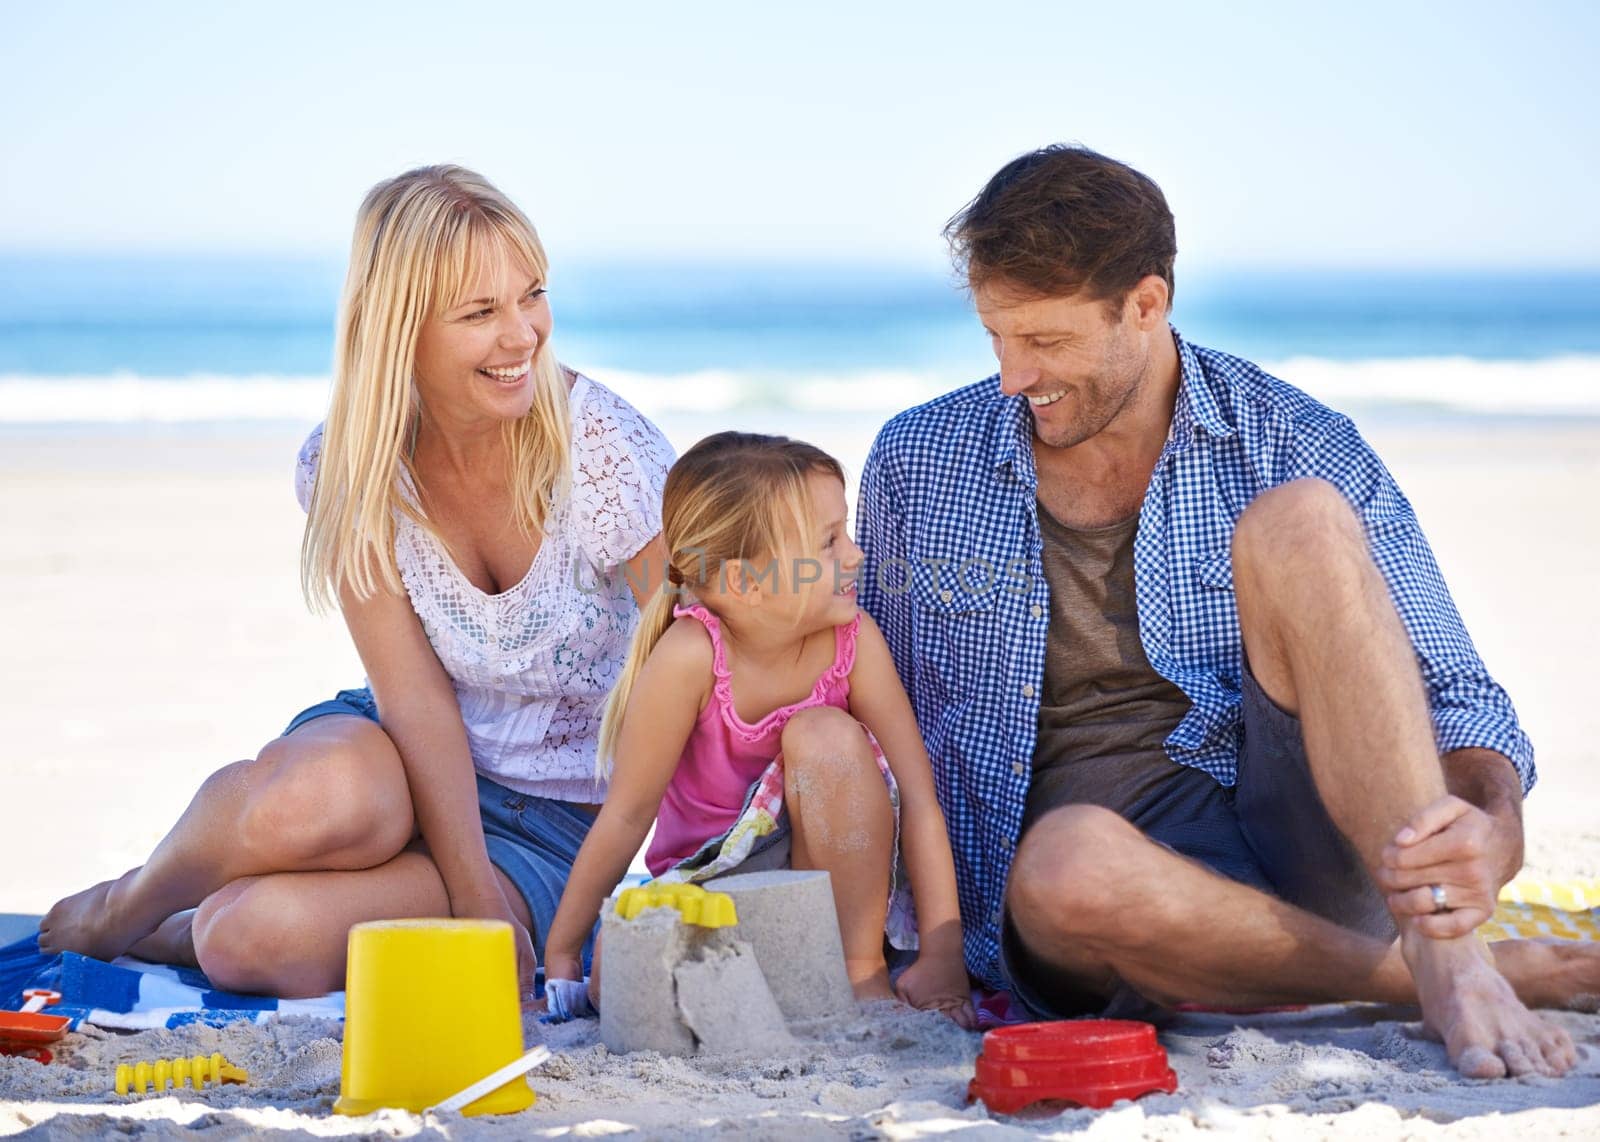 Mom, dad and girl with sandcastle by ocean on vacation with care, learning or building on holiday in summer. Father, mother and daughter with plastic bucket at beach for game, blanket or happy by sea.